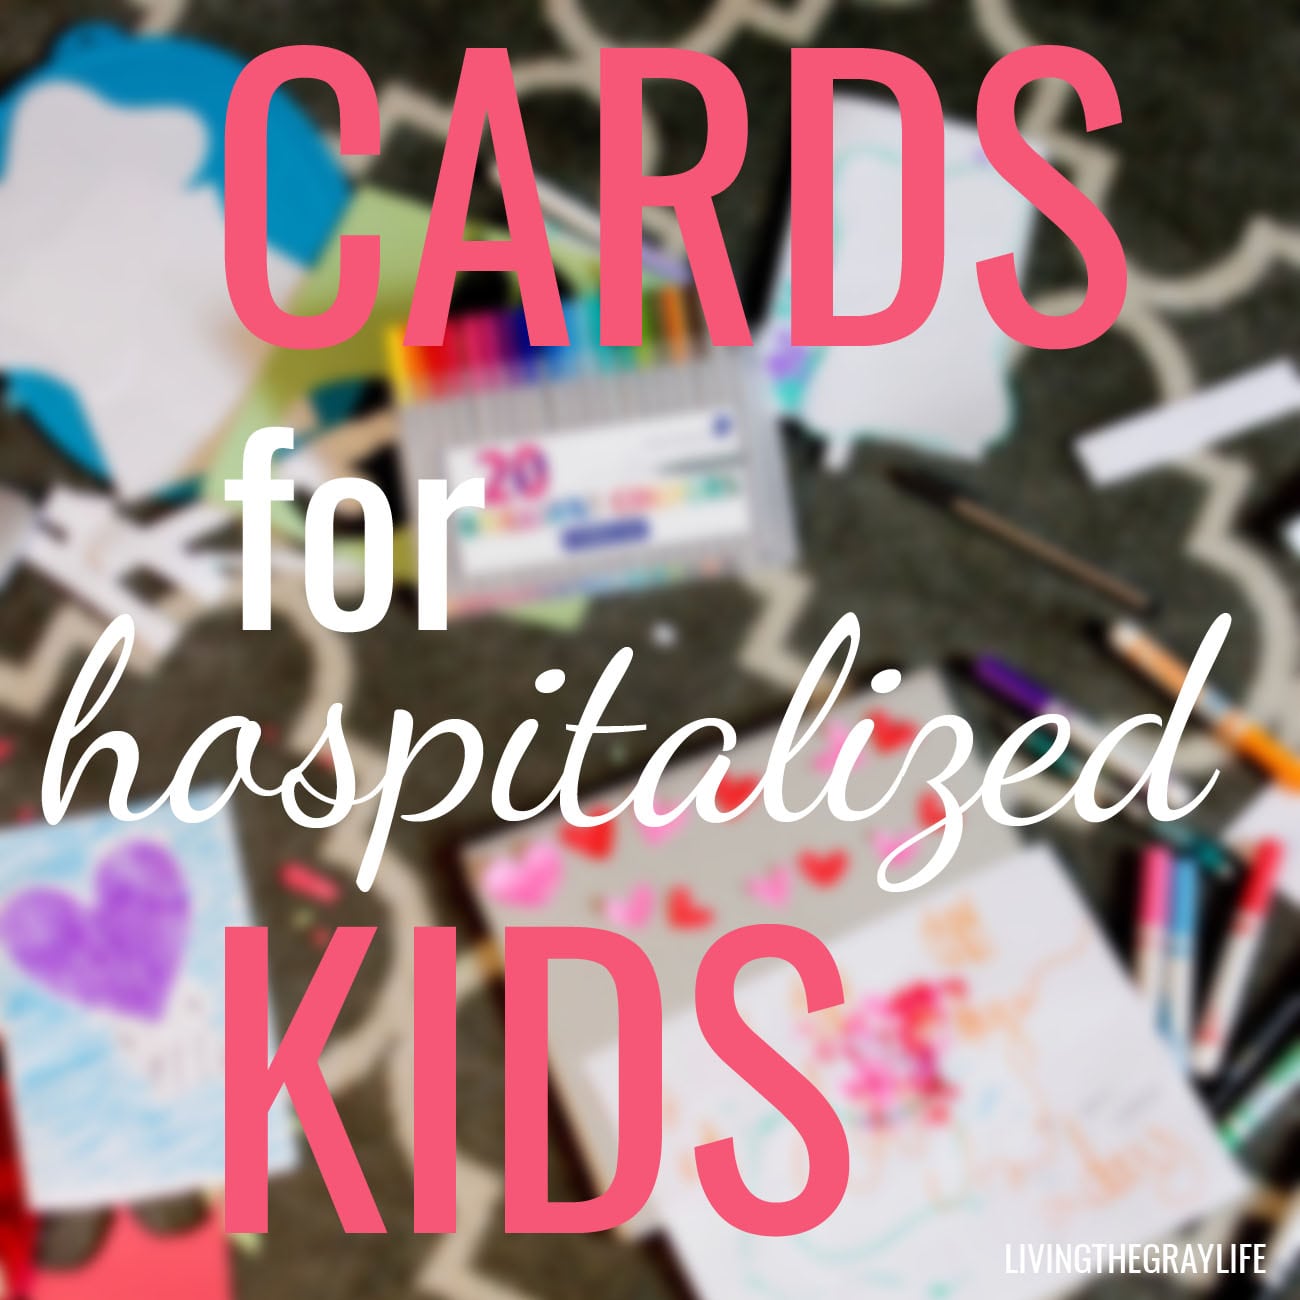 cards for service cards for hospitalized kids